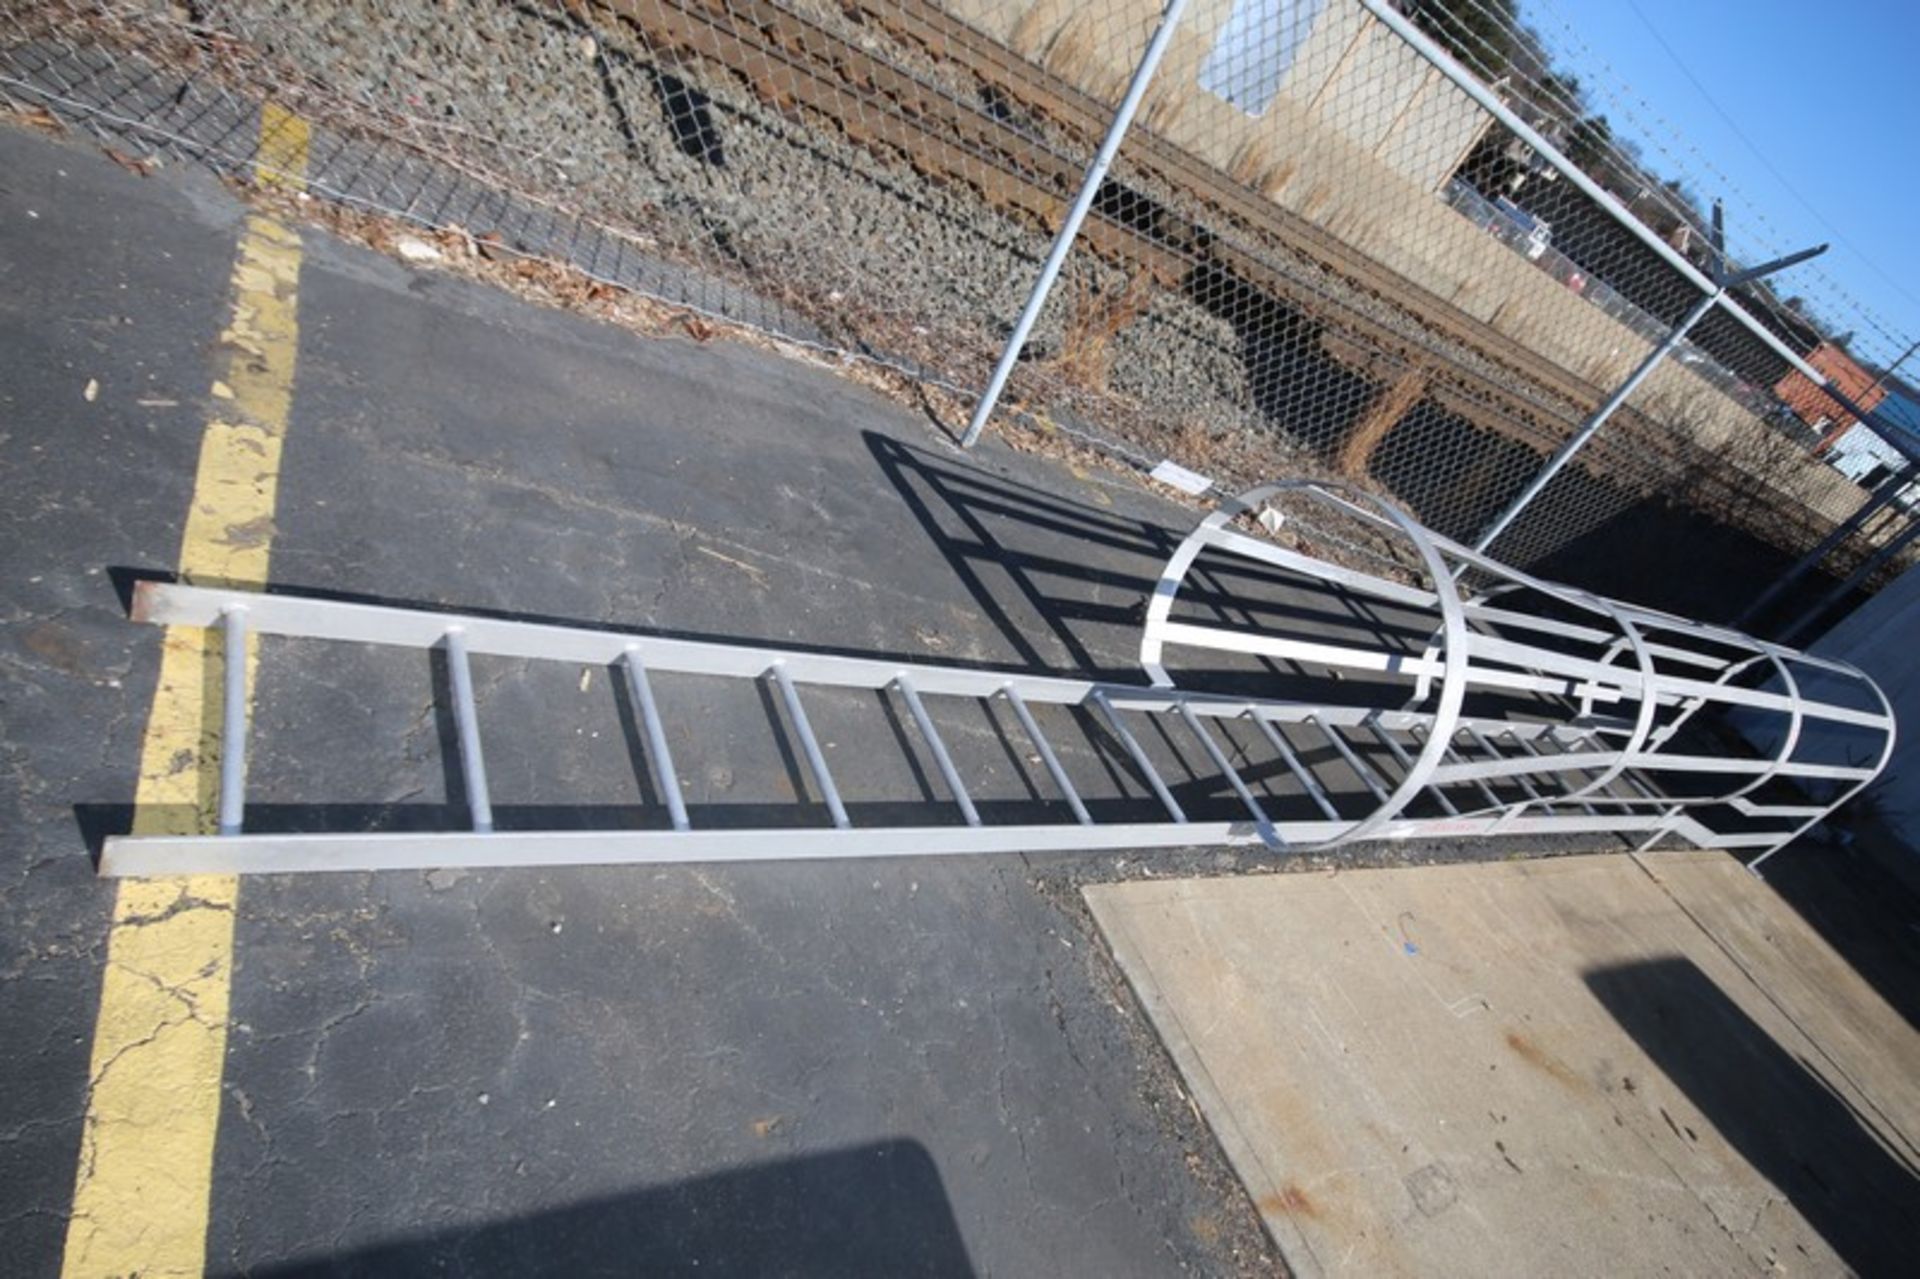 16' Safetly Steel Ladder with Safety Cage (INV#101783) (Located @ the MDG Auction Showroom in